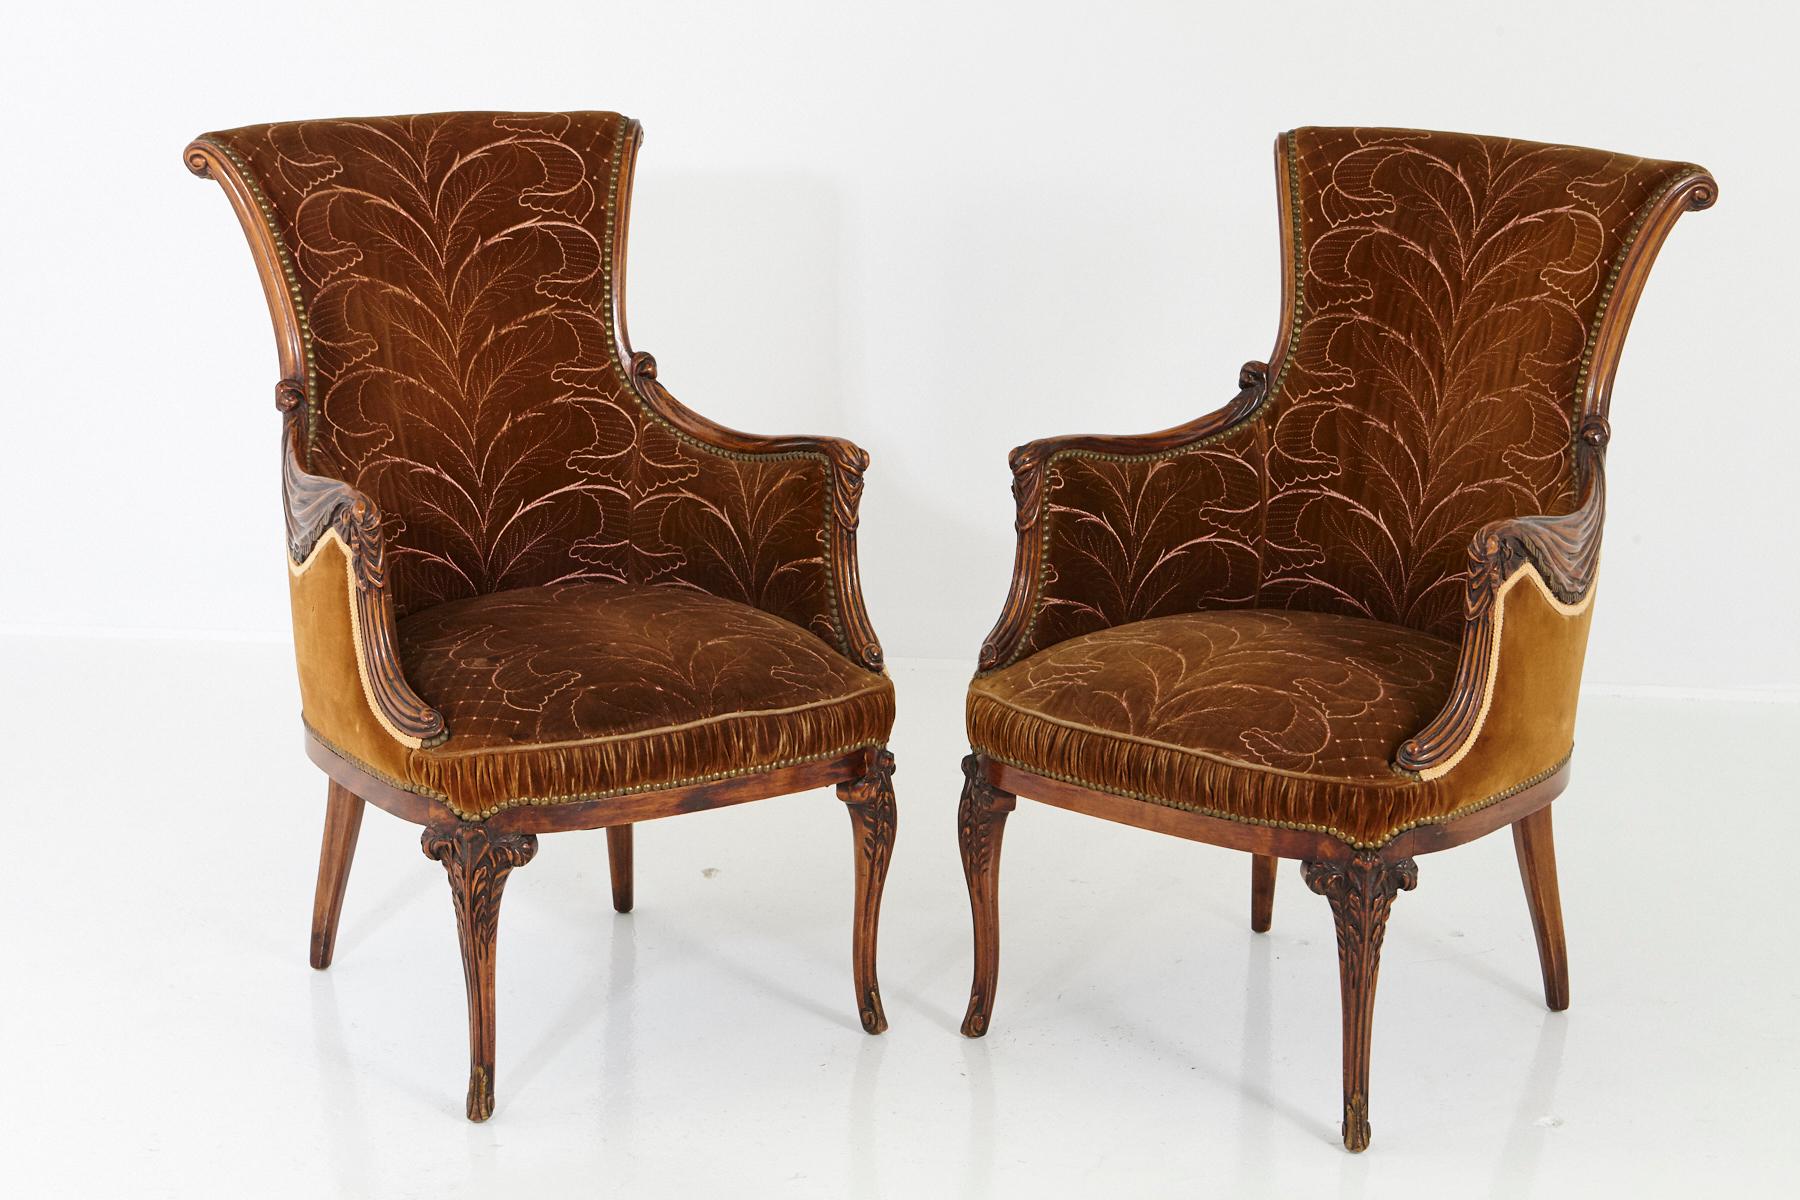 Pair of French Art Nouveau Armchairs, Two-Tone Cognac Colored Embroidered Velvet 10